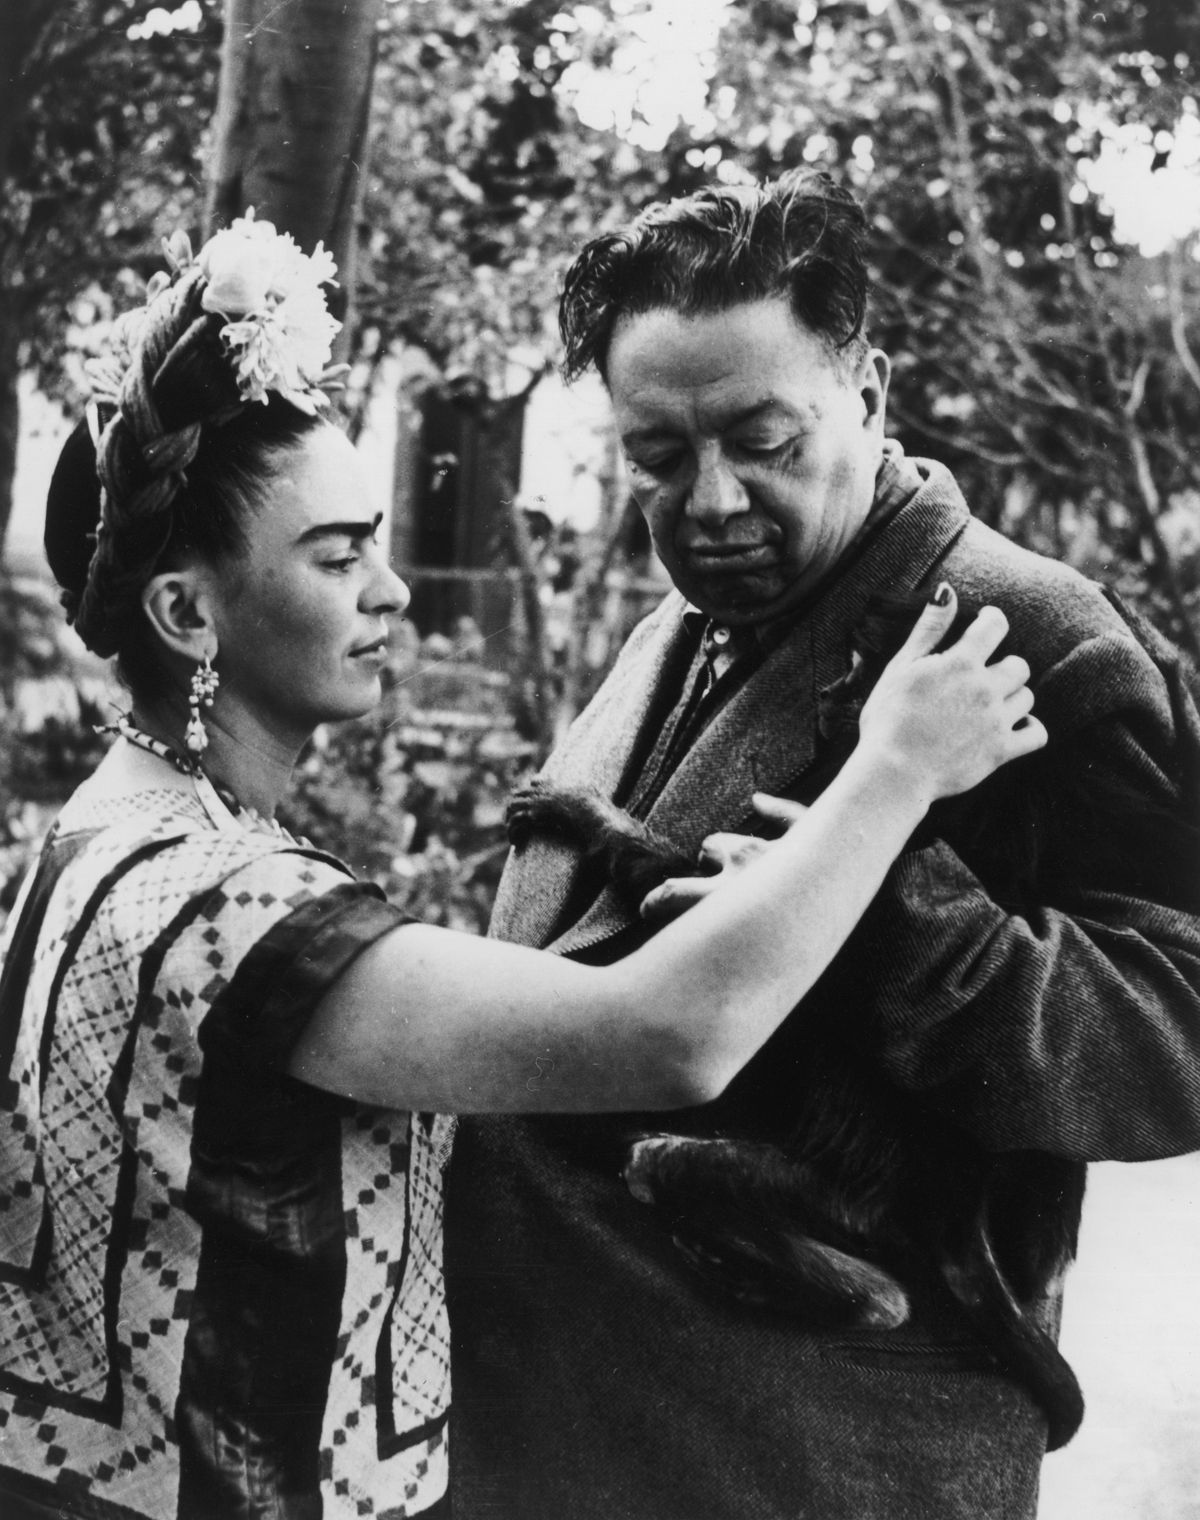 Frida Kahlo pets a monkey, possibly Fulang-Chang, clinging to the jacket of her husband, Mexican artist Diego Rivera